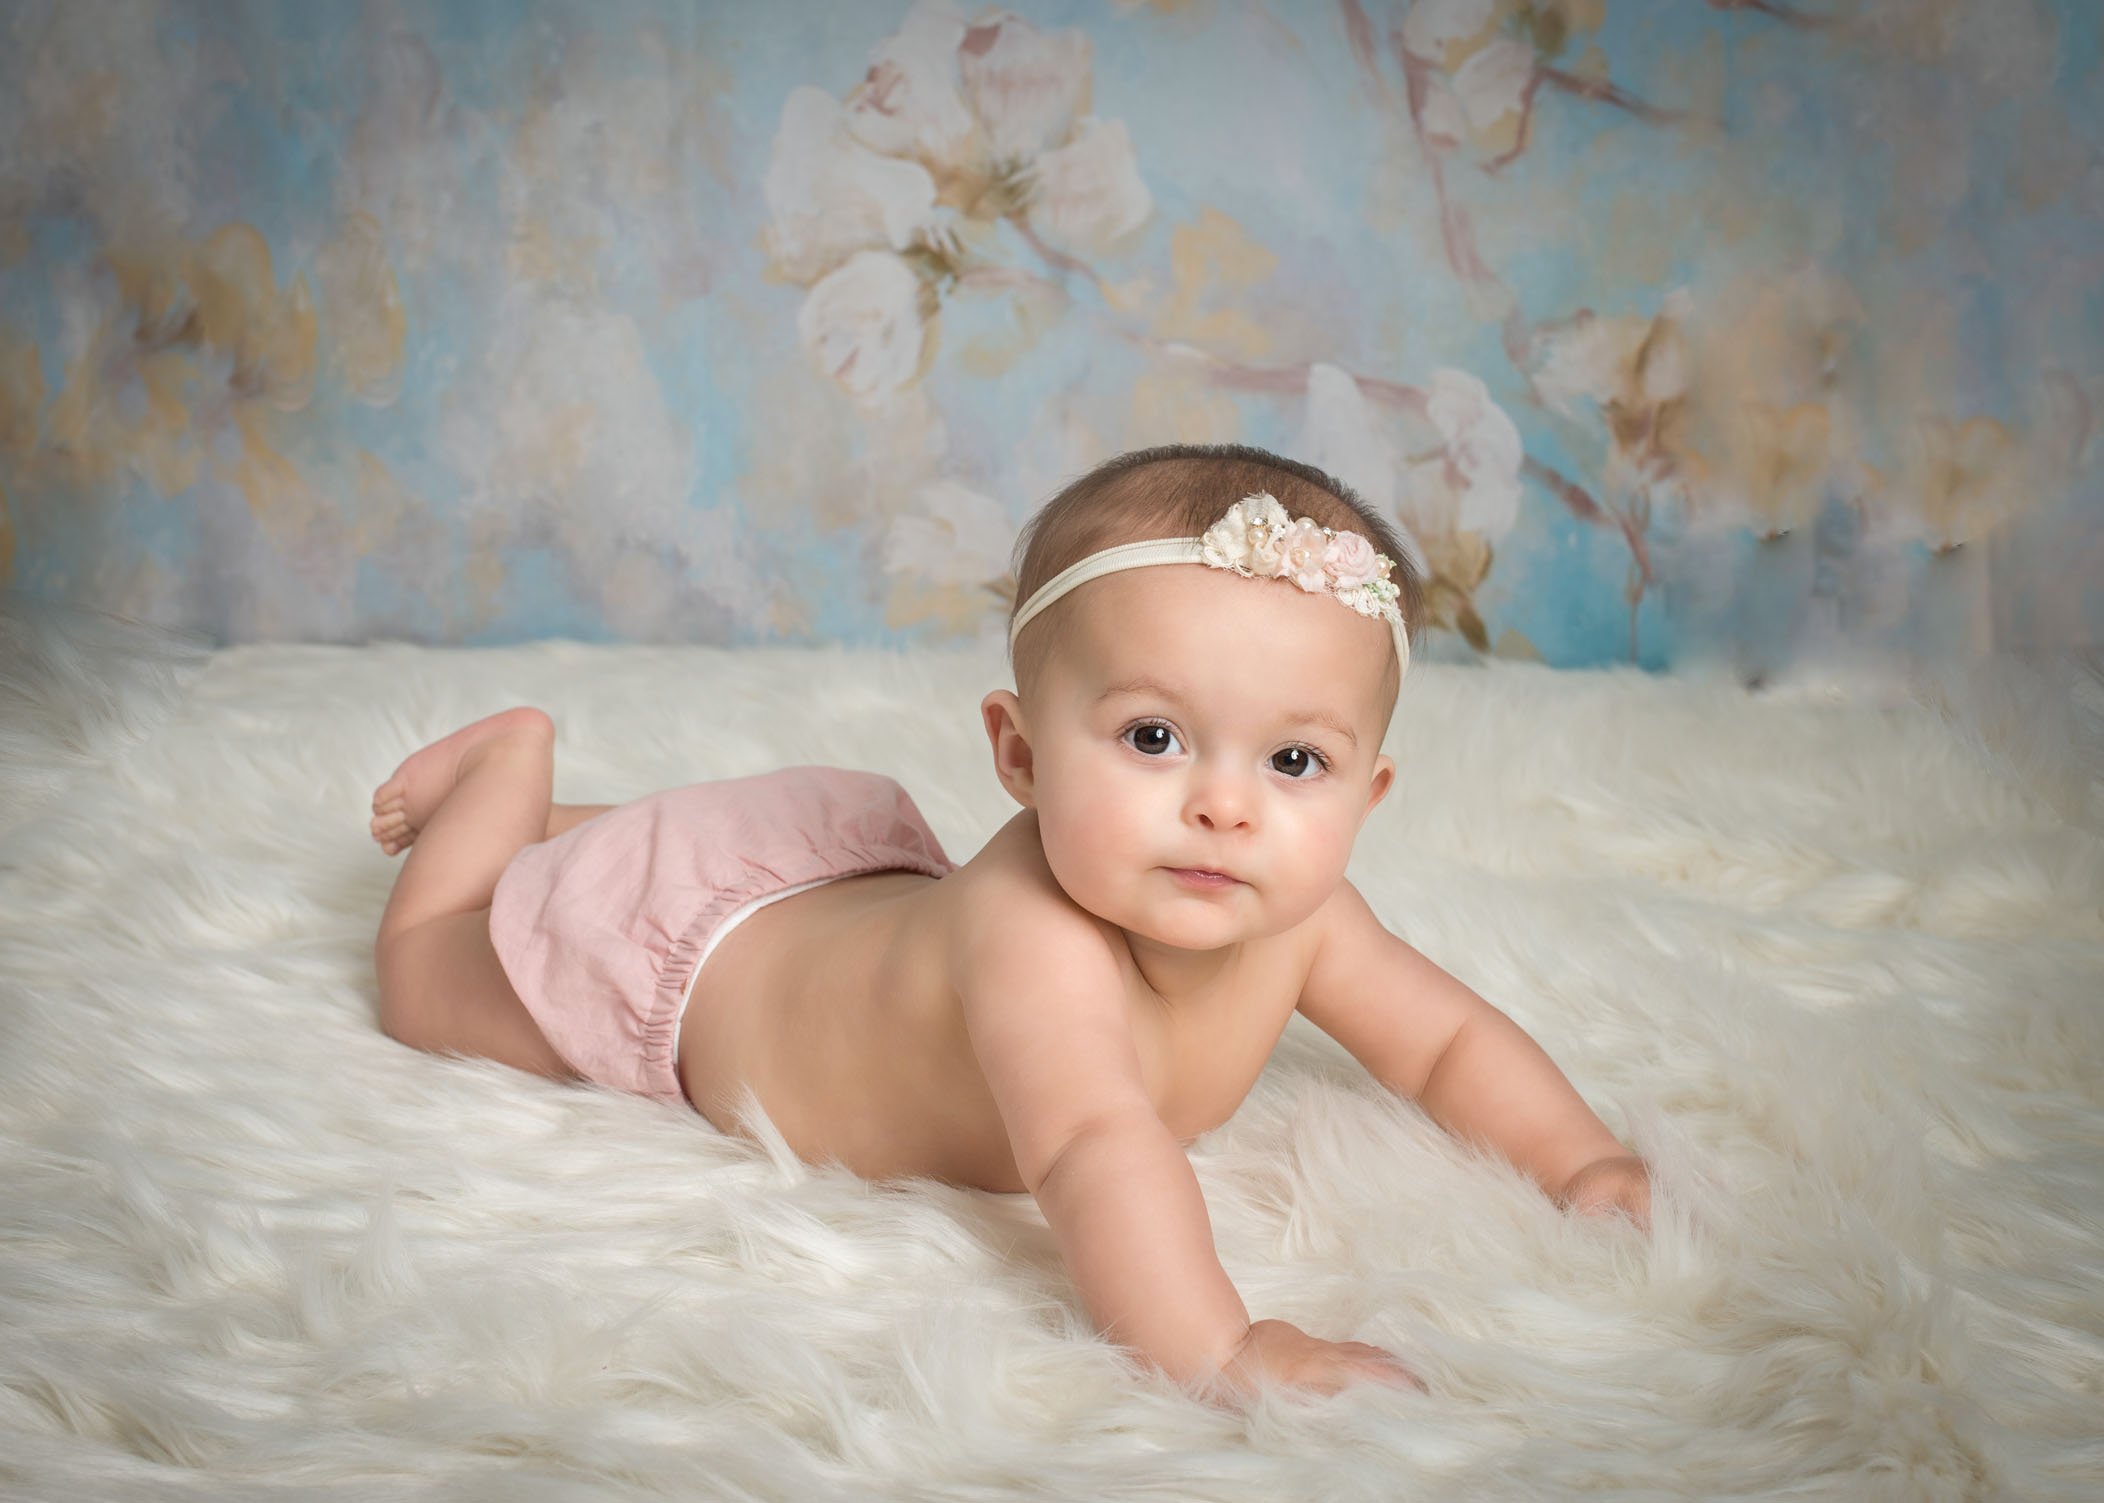 6 month old baby girl lying on white fur with headband on looking at the camera